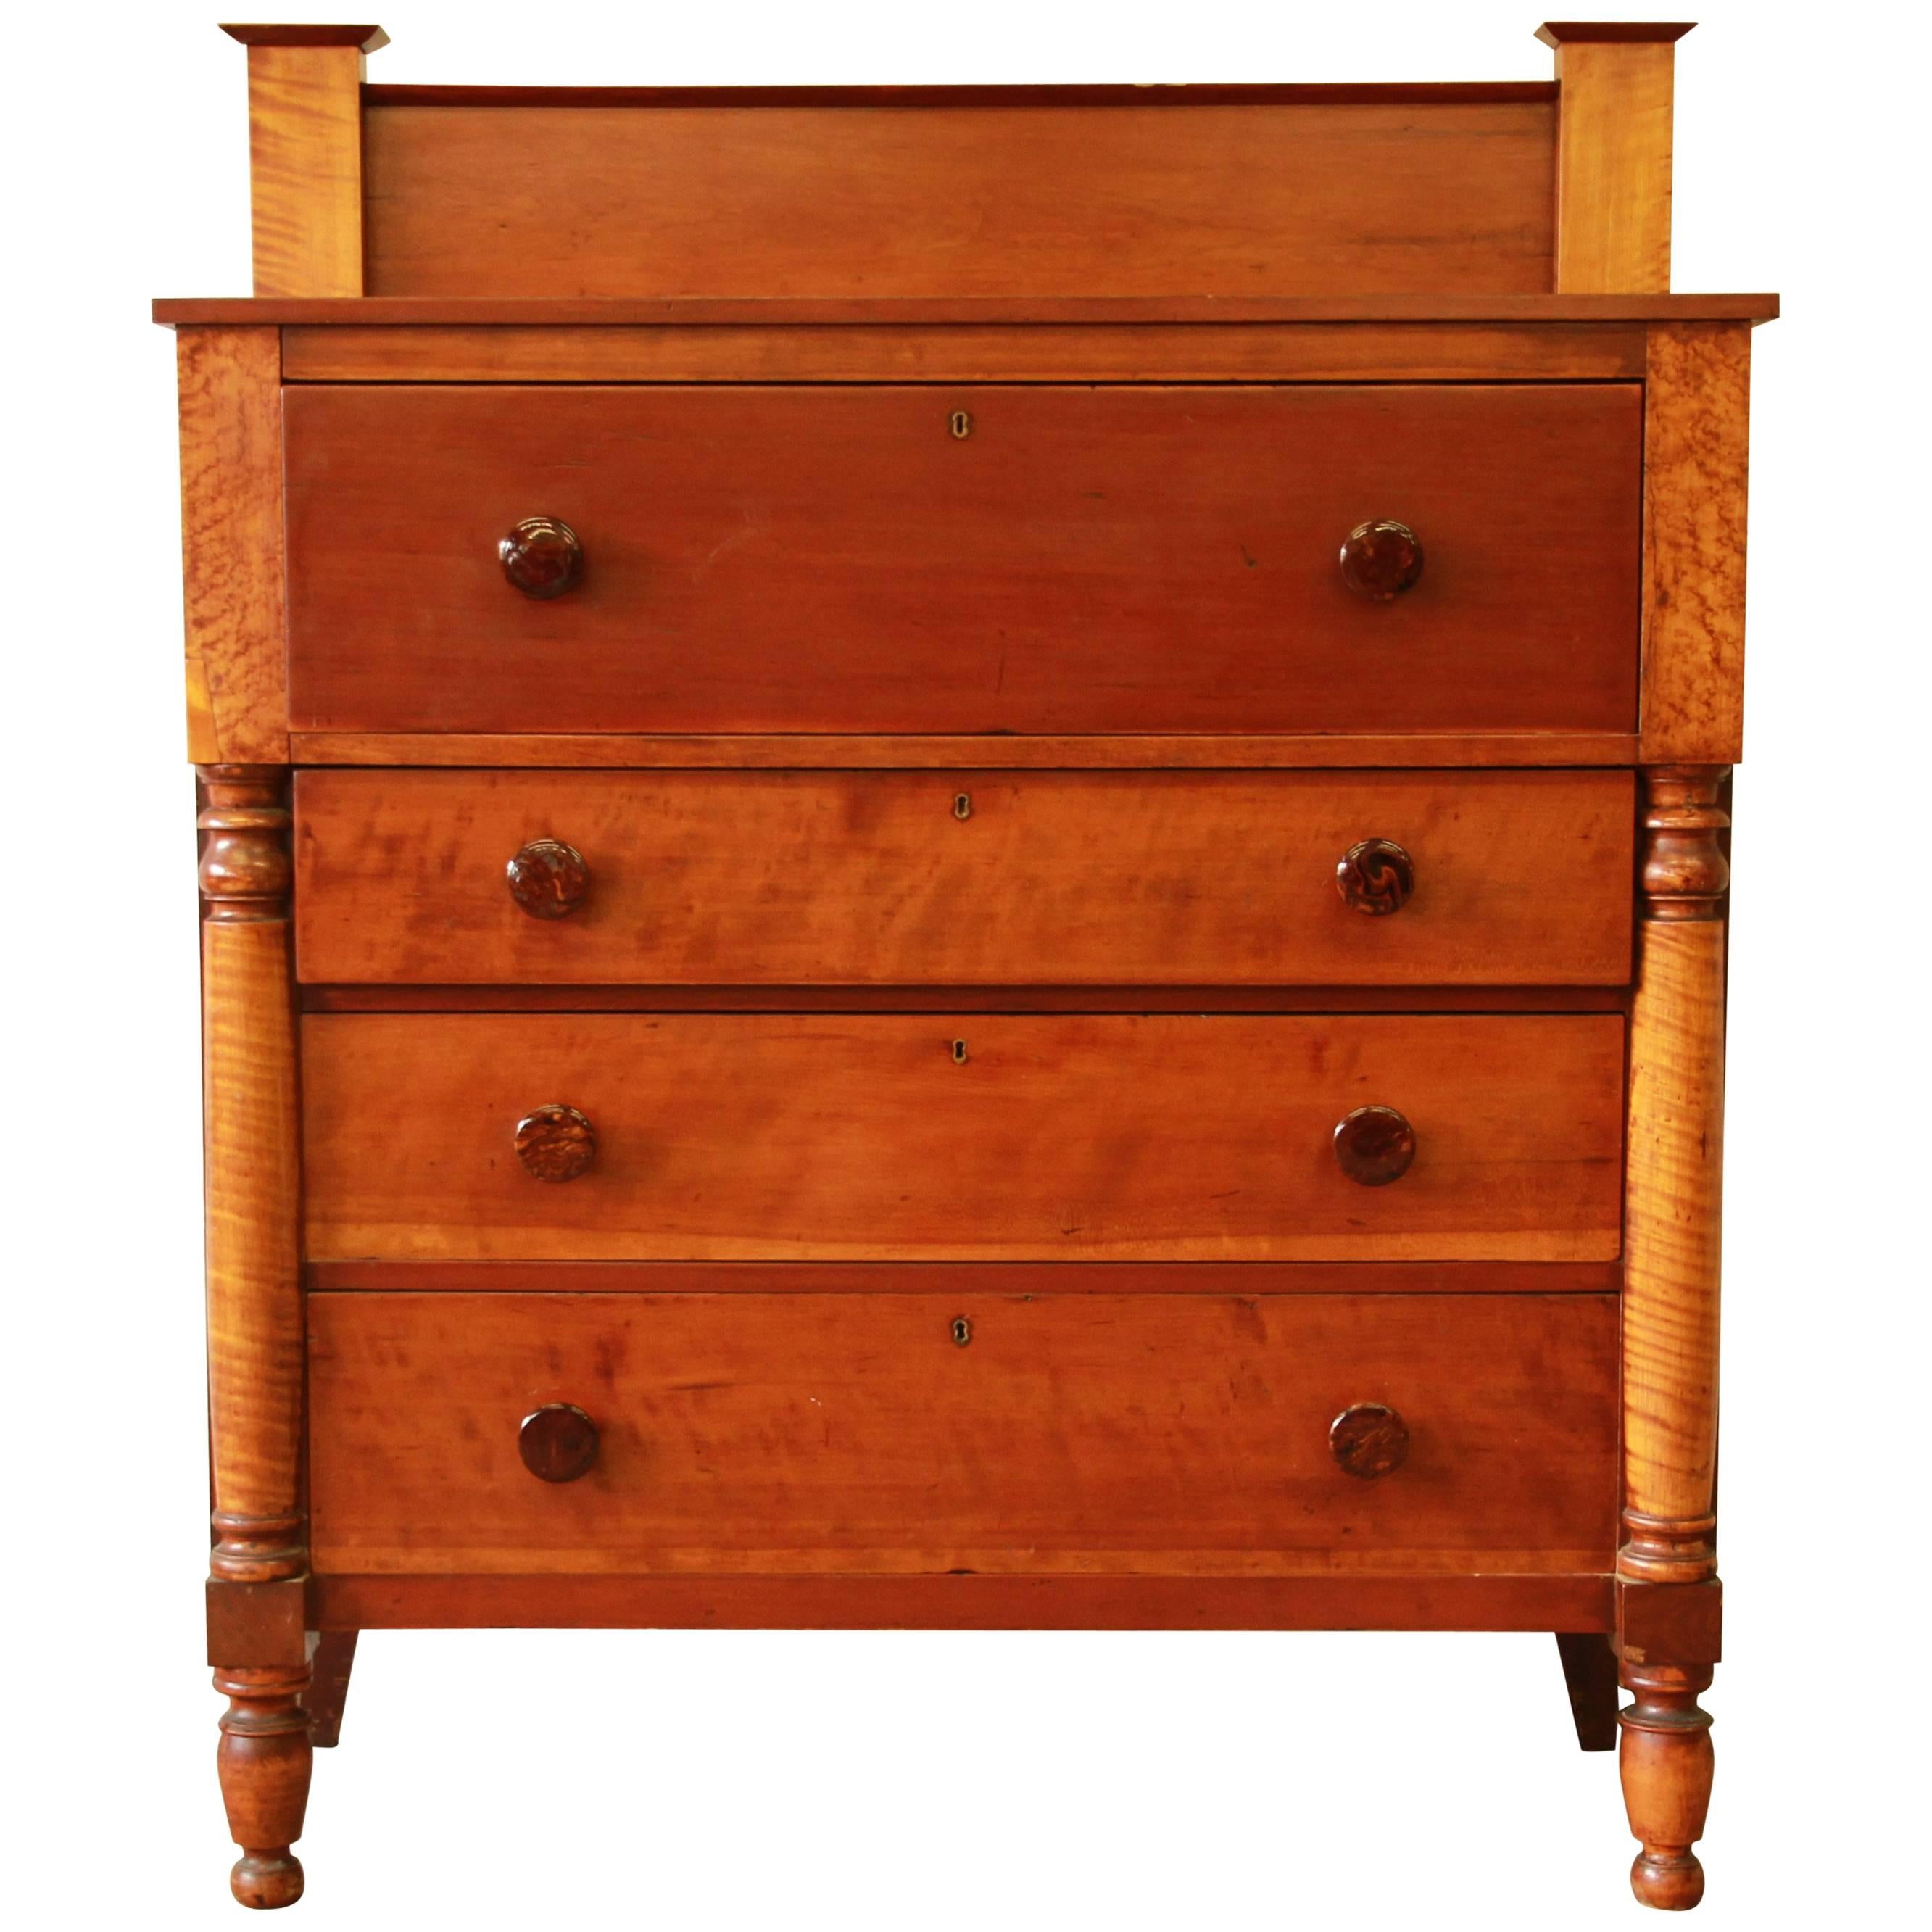 American Sheraton Tiger Maple and Cherry Chest of Drawers, 1820s